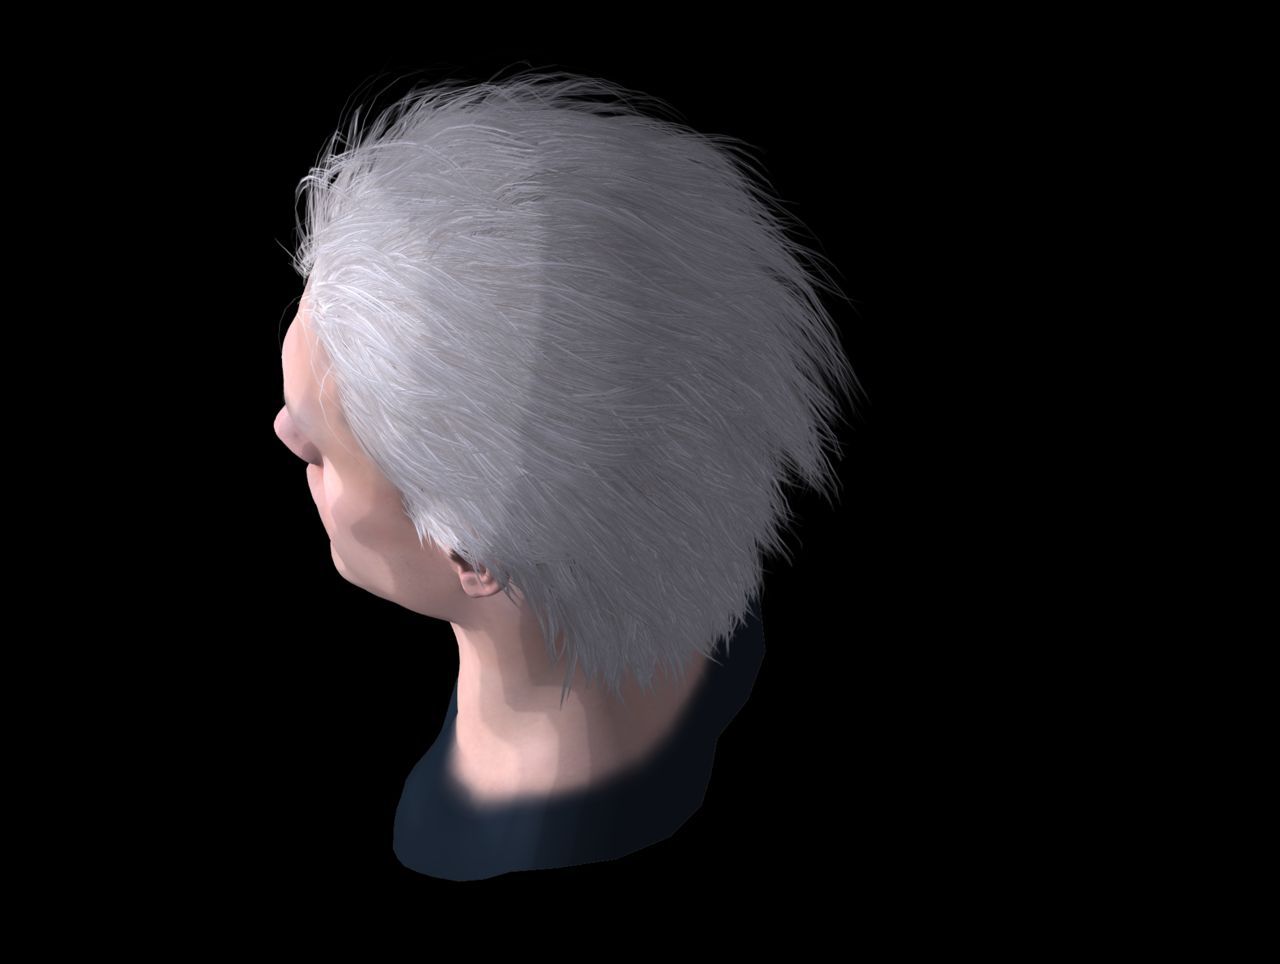 [J.A.] DMC5 | Vergil Head Reference PNG 40